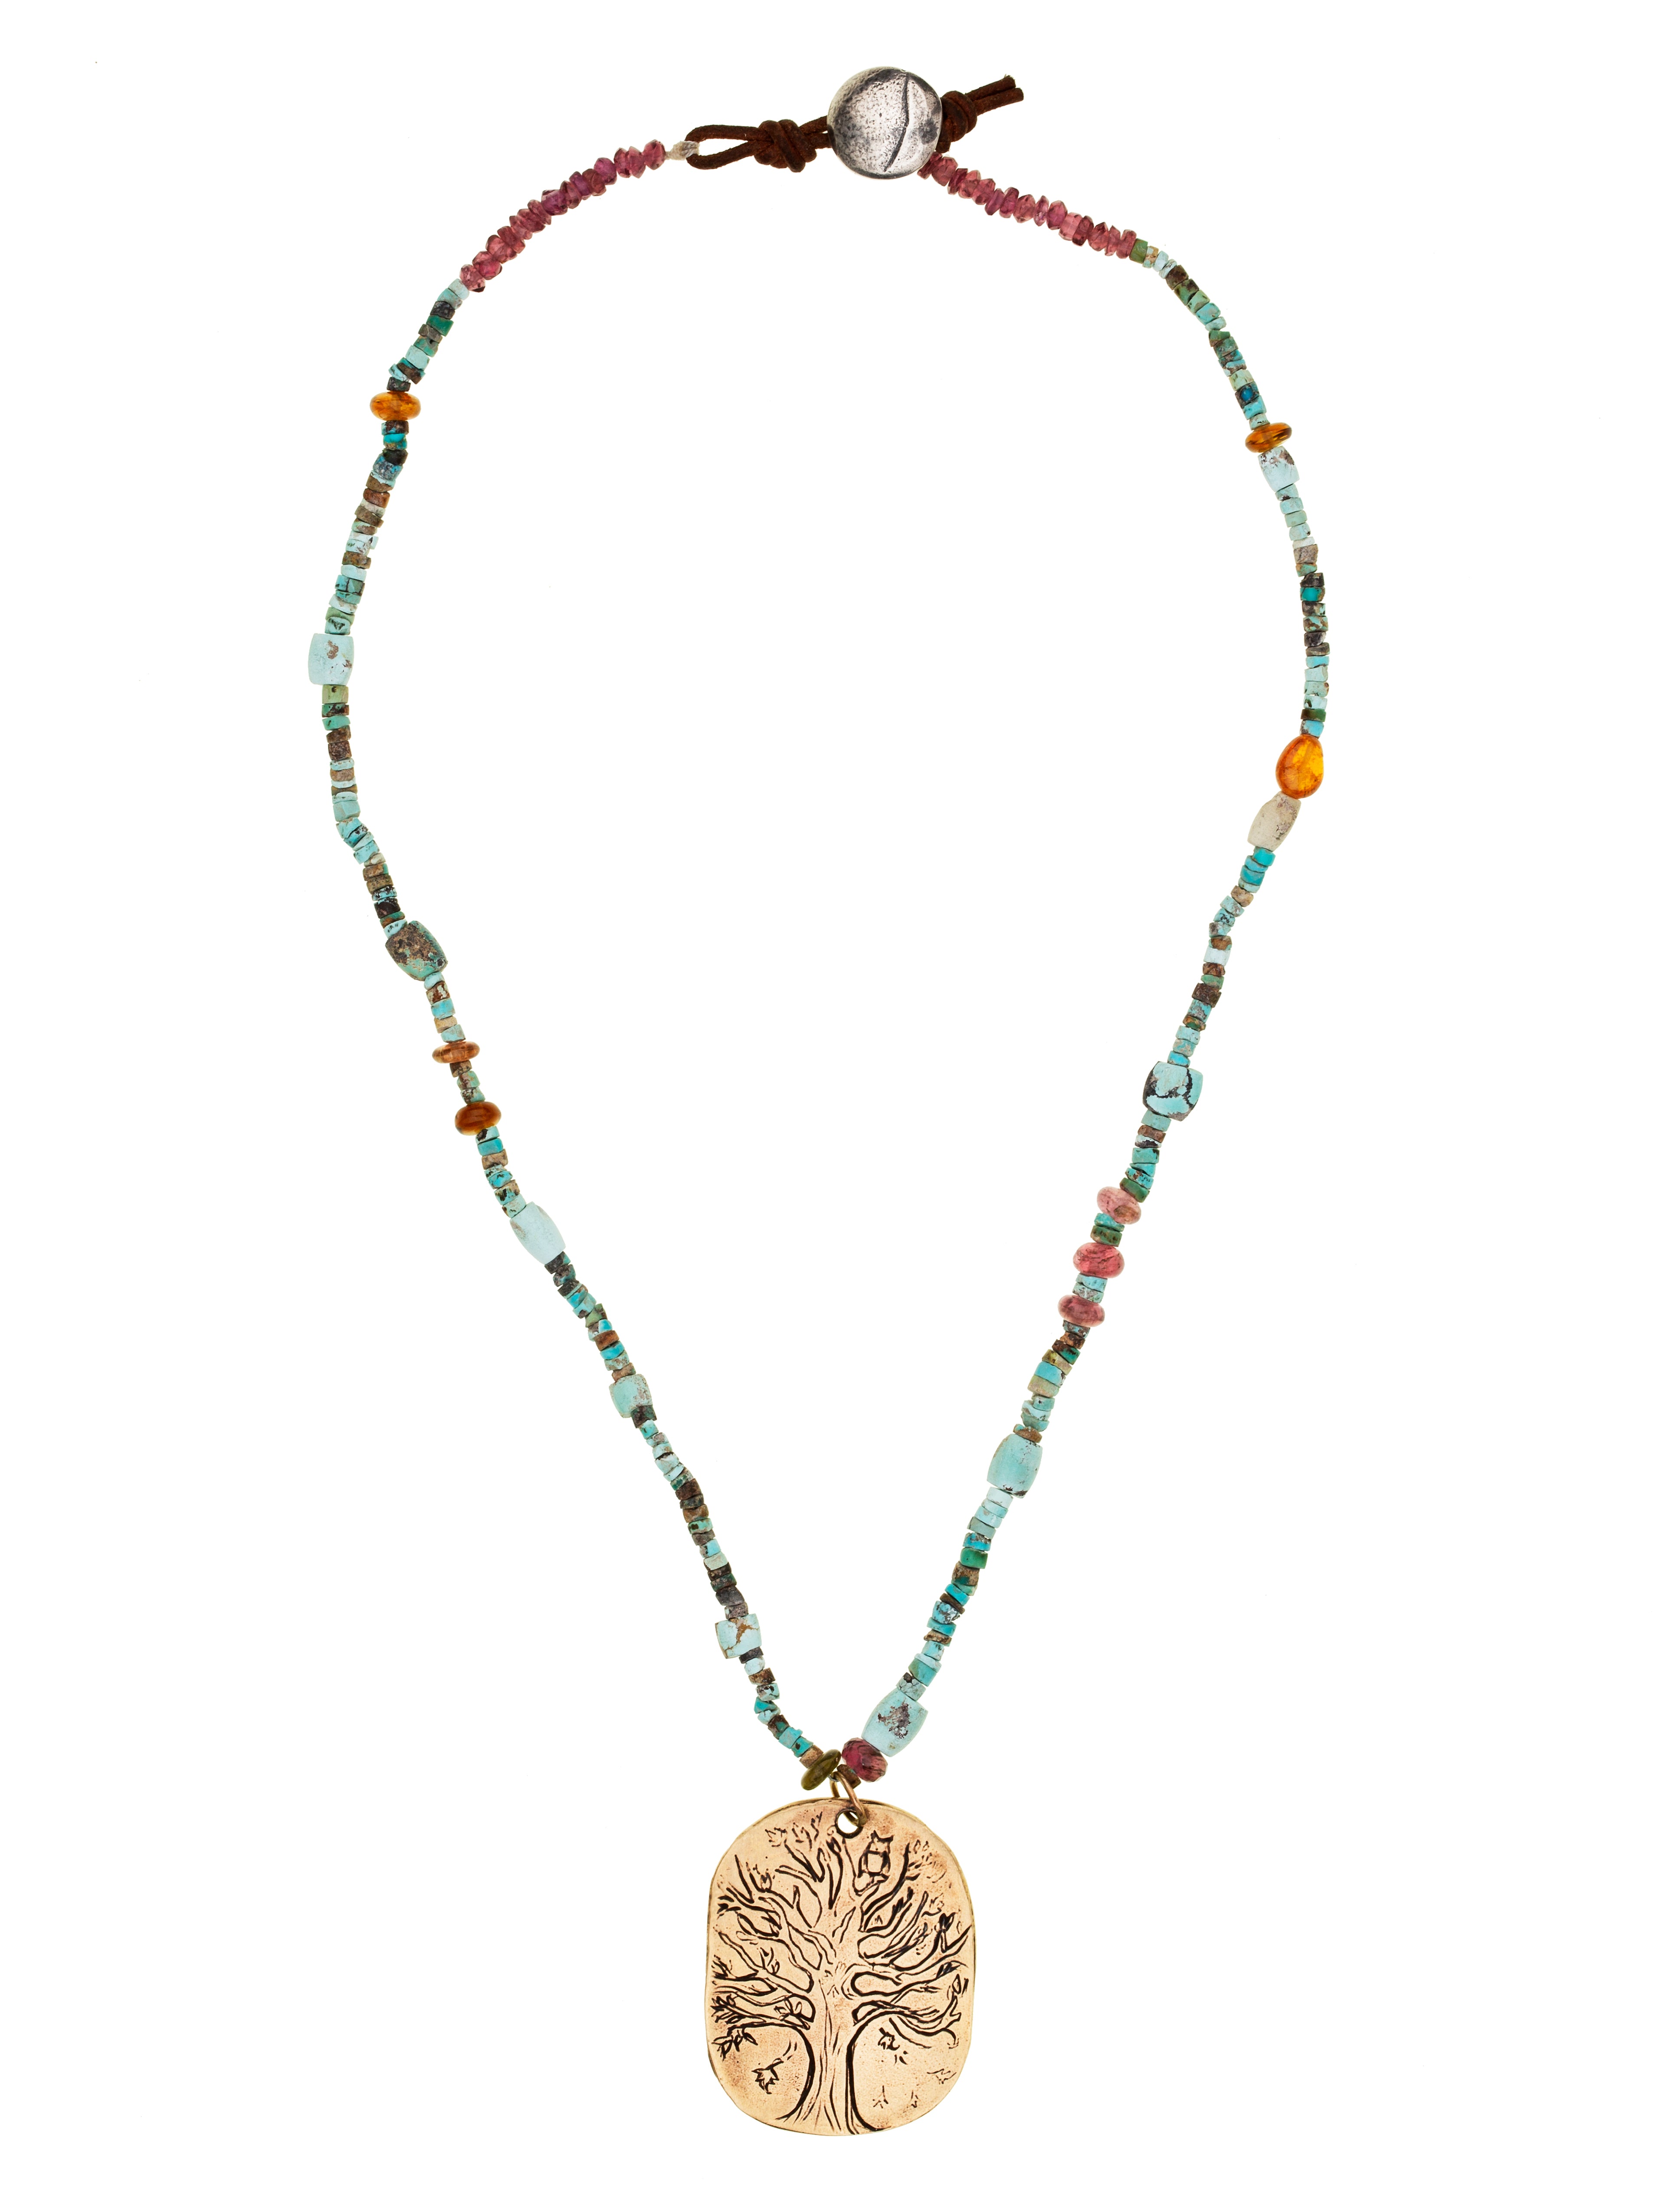 Find Wisdom Within Necklace